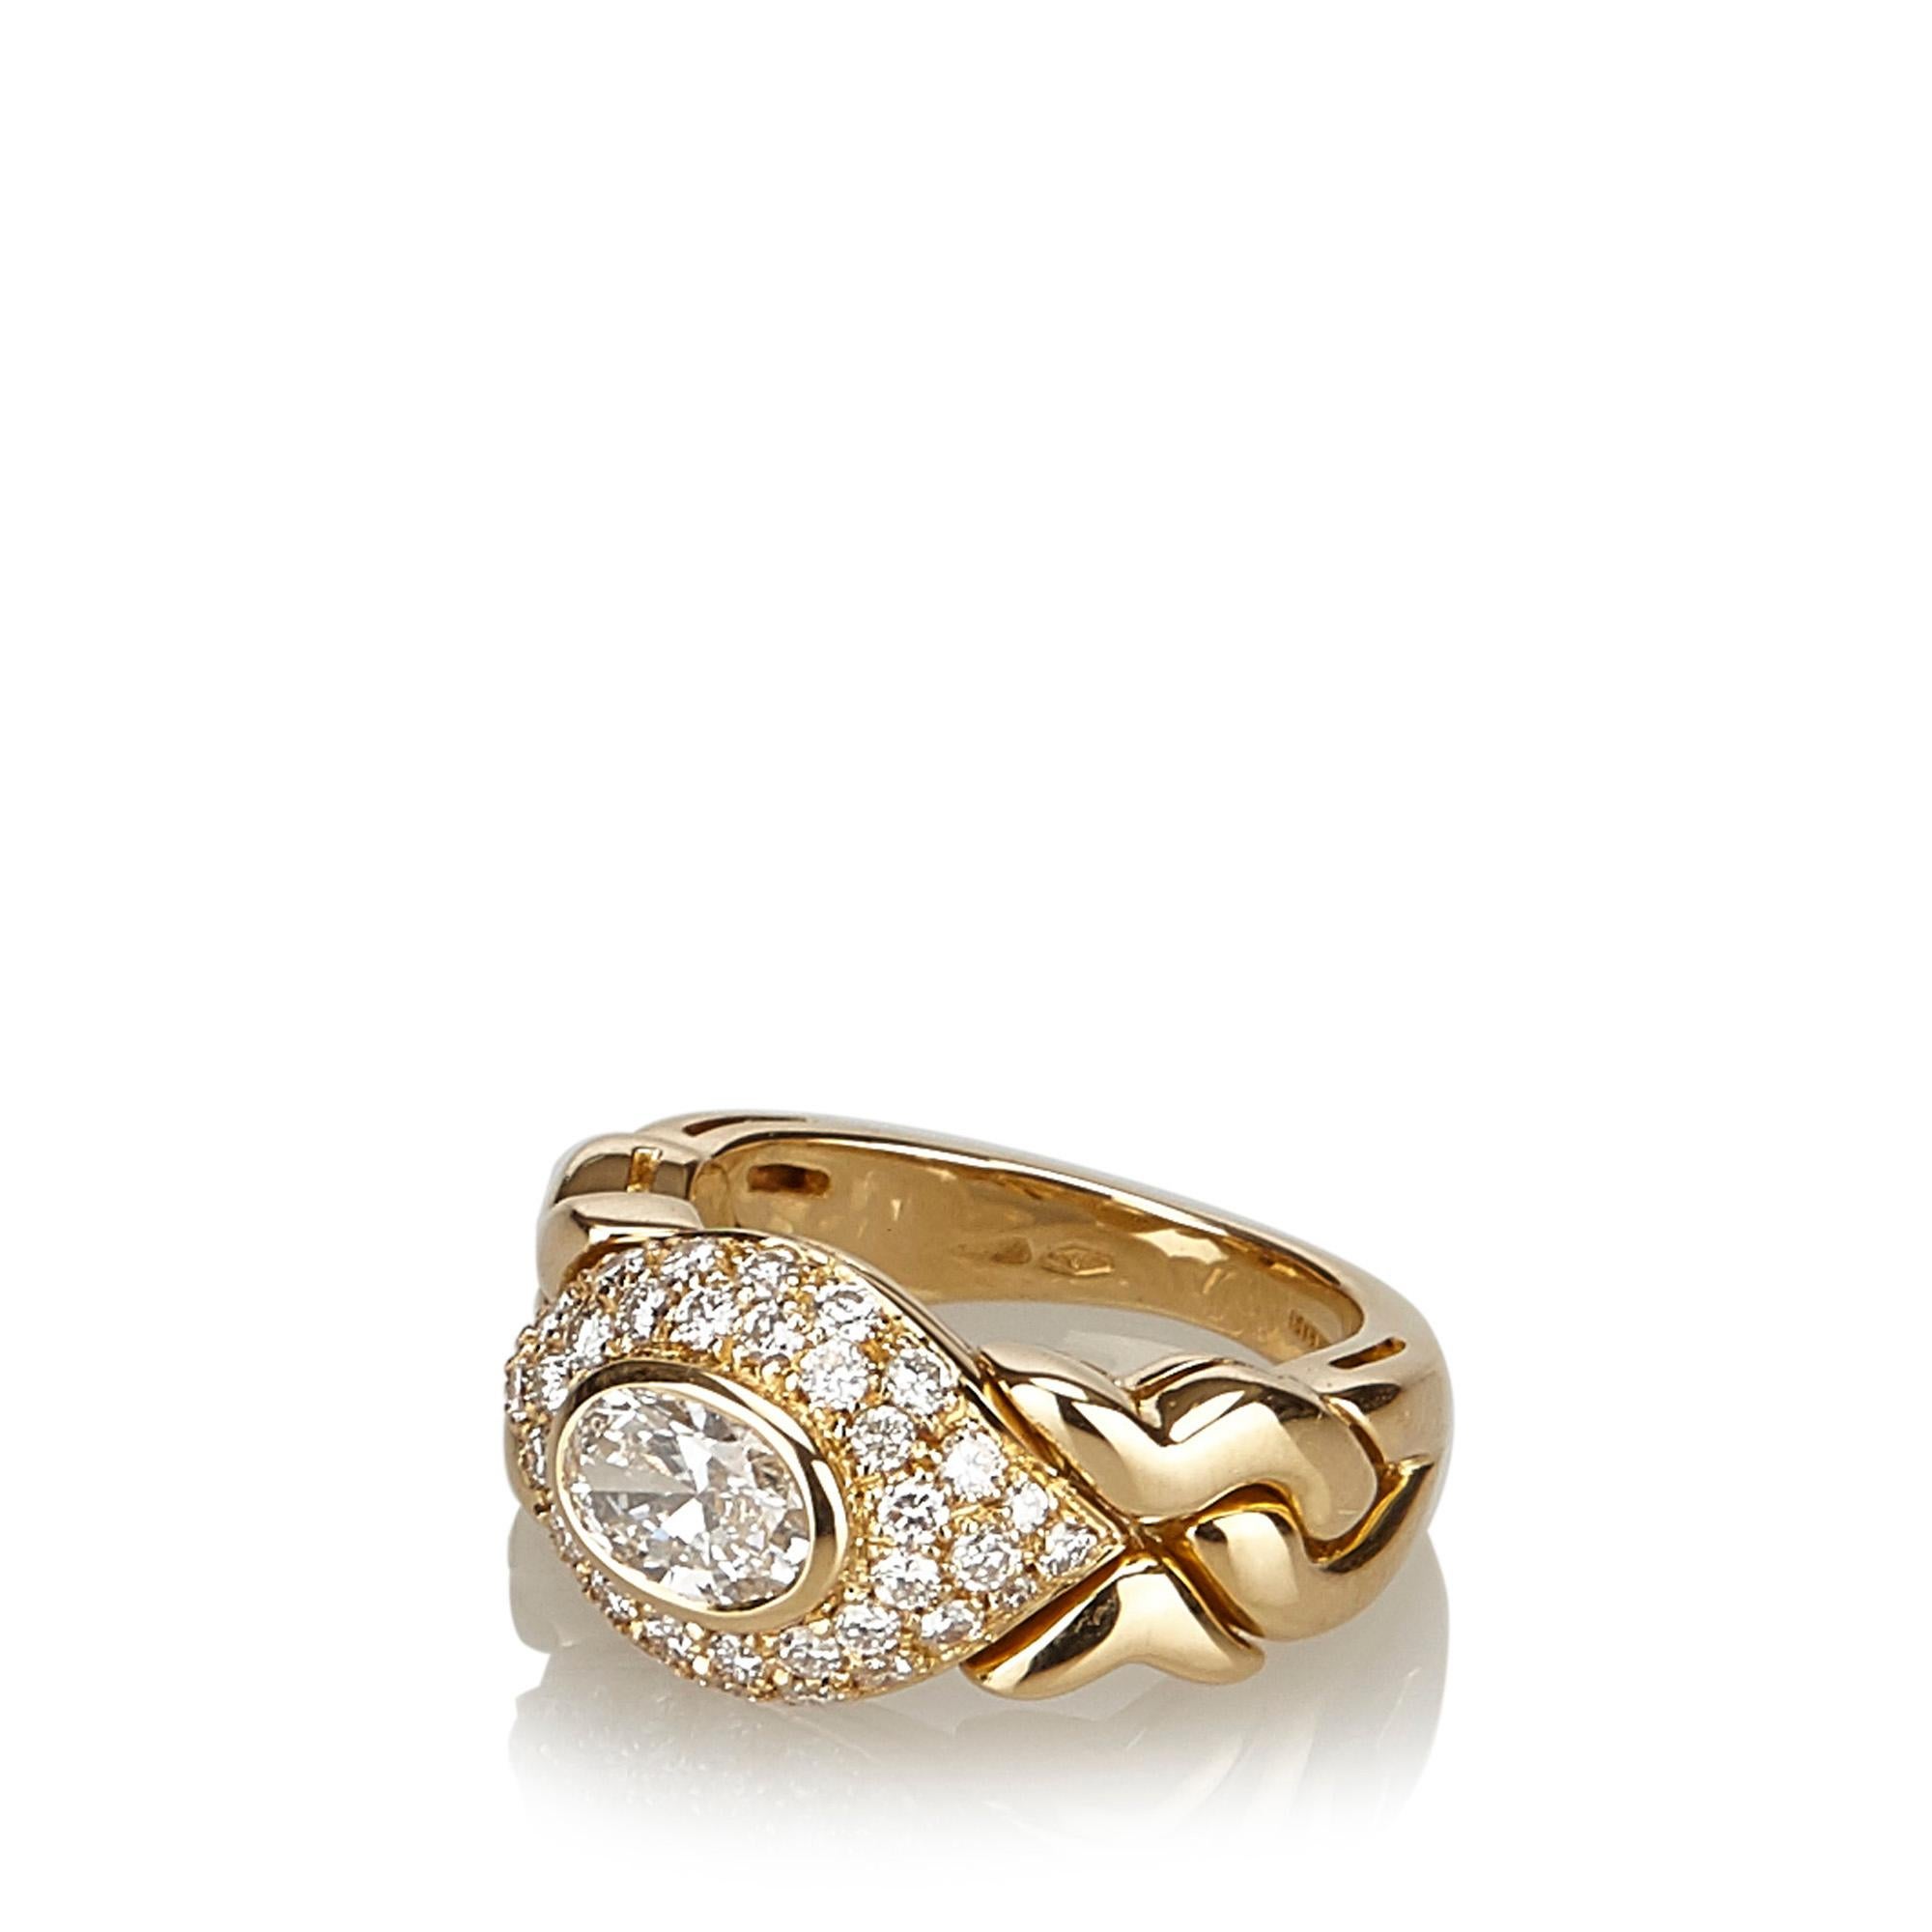 This ring features a 18K yellow gold hardware and a 0.5 carat oval diamond at head. Weight about 9.7 g. It carries as AB condition rating.

Inclusions: 
Box

Dimensions:
Length: 8.50 cm
Width: 0.30 cm
Depth: 0.80 cm
Hand Drop: 0.80 cm
Shoulder Drop: